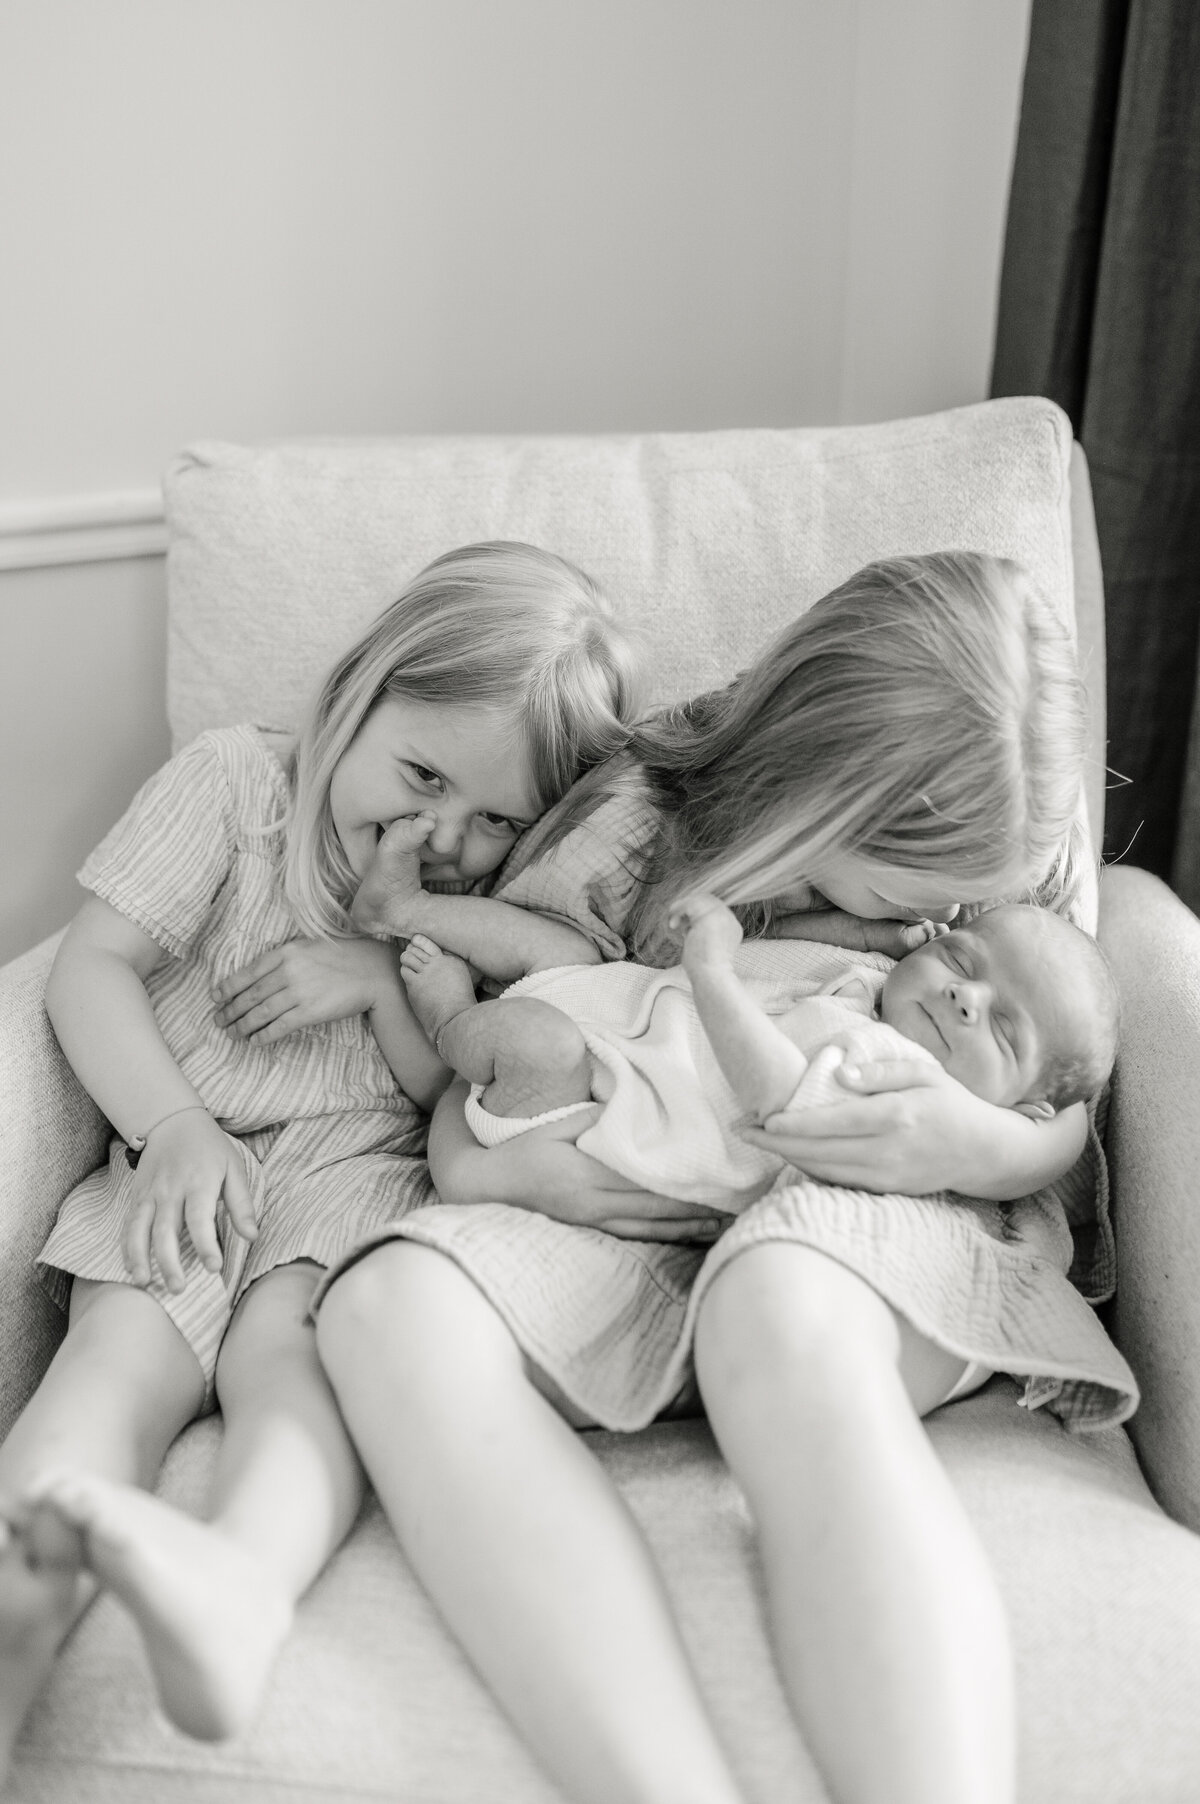 Two girls ages 5 and 7 are sitting in a rocker chair holding their newborn baby brother during a Milwaukee photo session